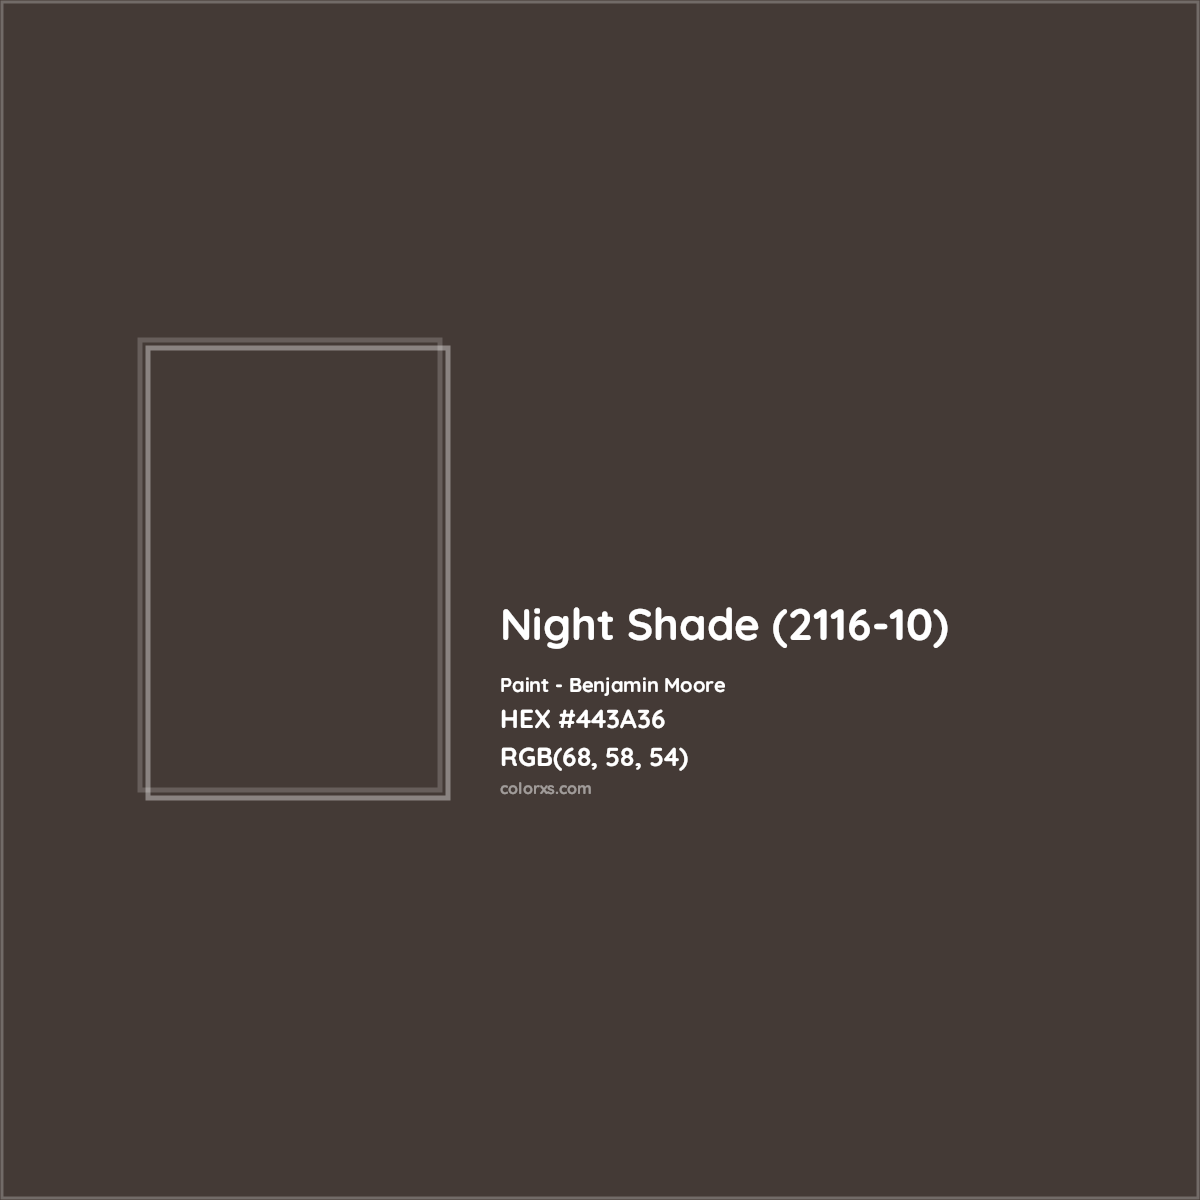 HEX #443A36 Night Shade (2116-10) Paint Benjamin Moore - Color Code